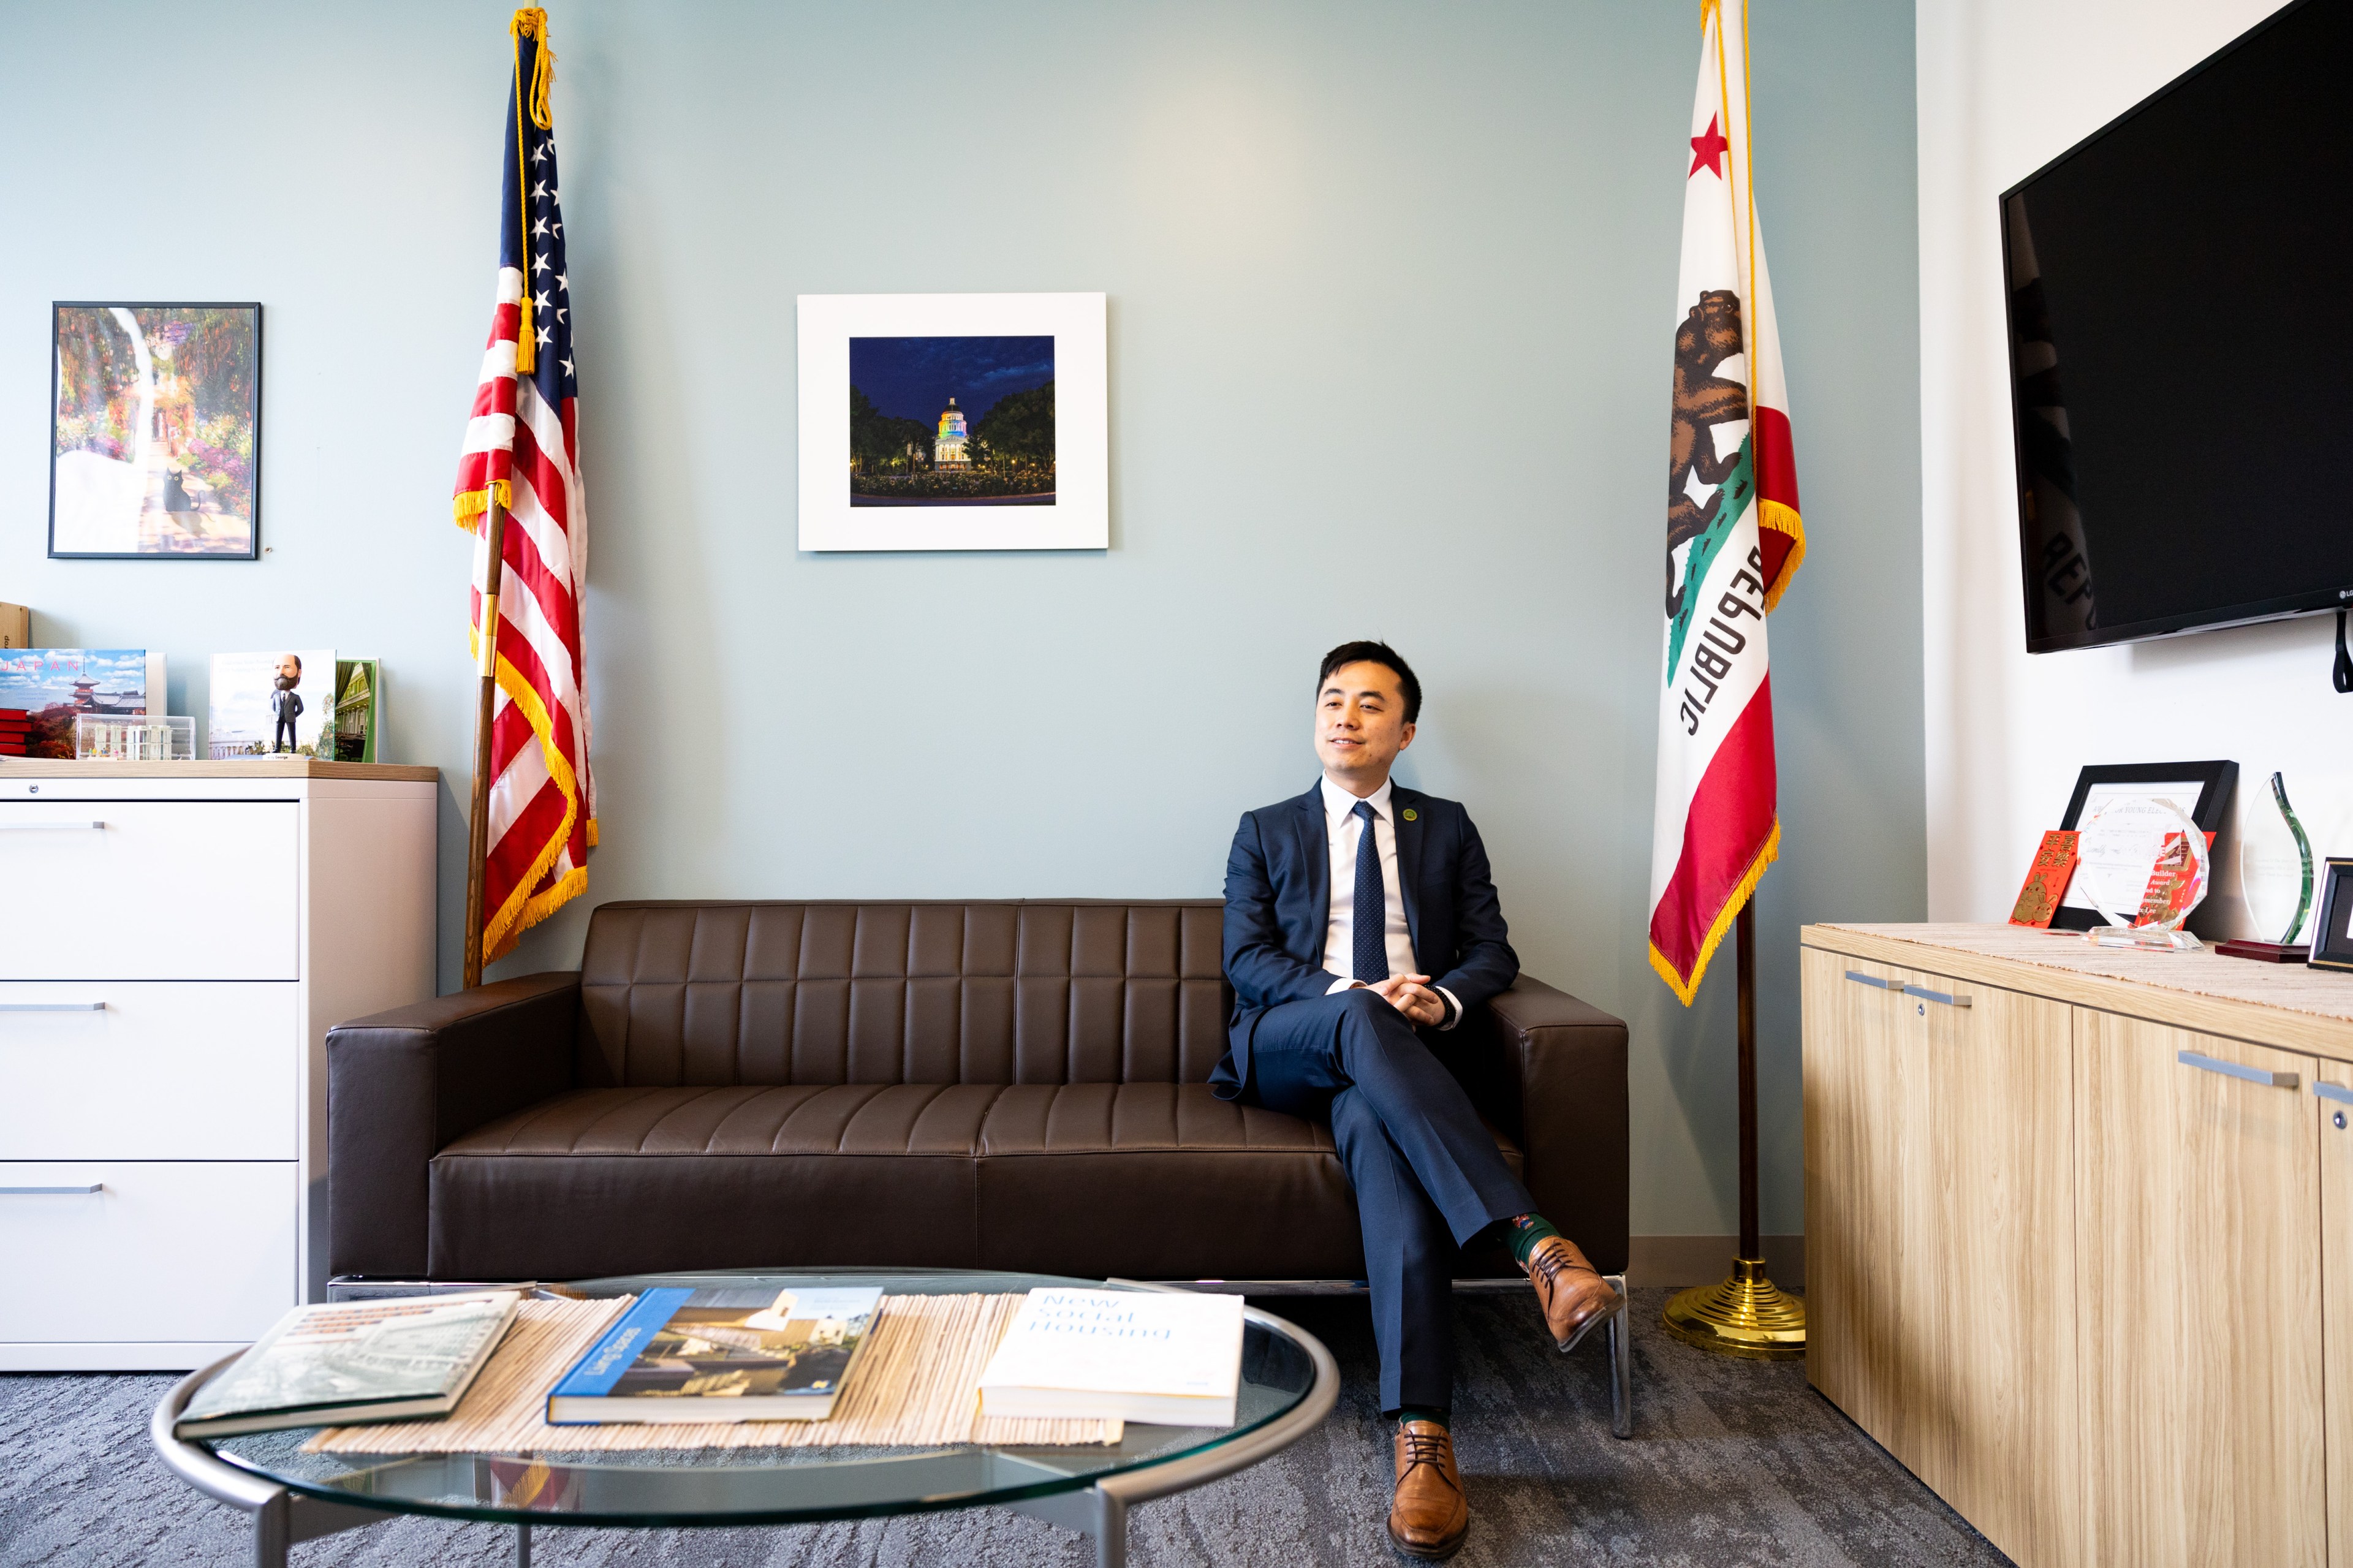 A man in a suit sits on a couch in an office with U.S. and California flags, artwork, and a TV.